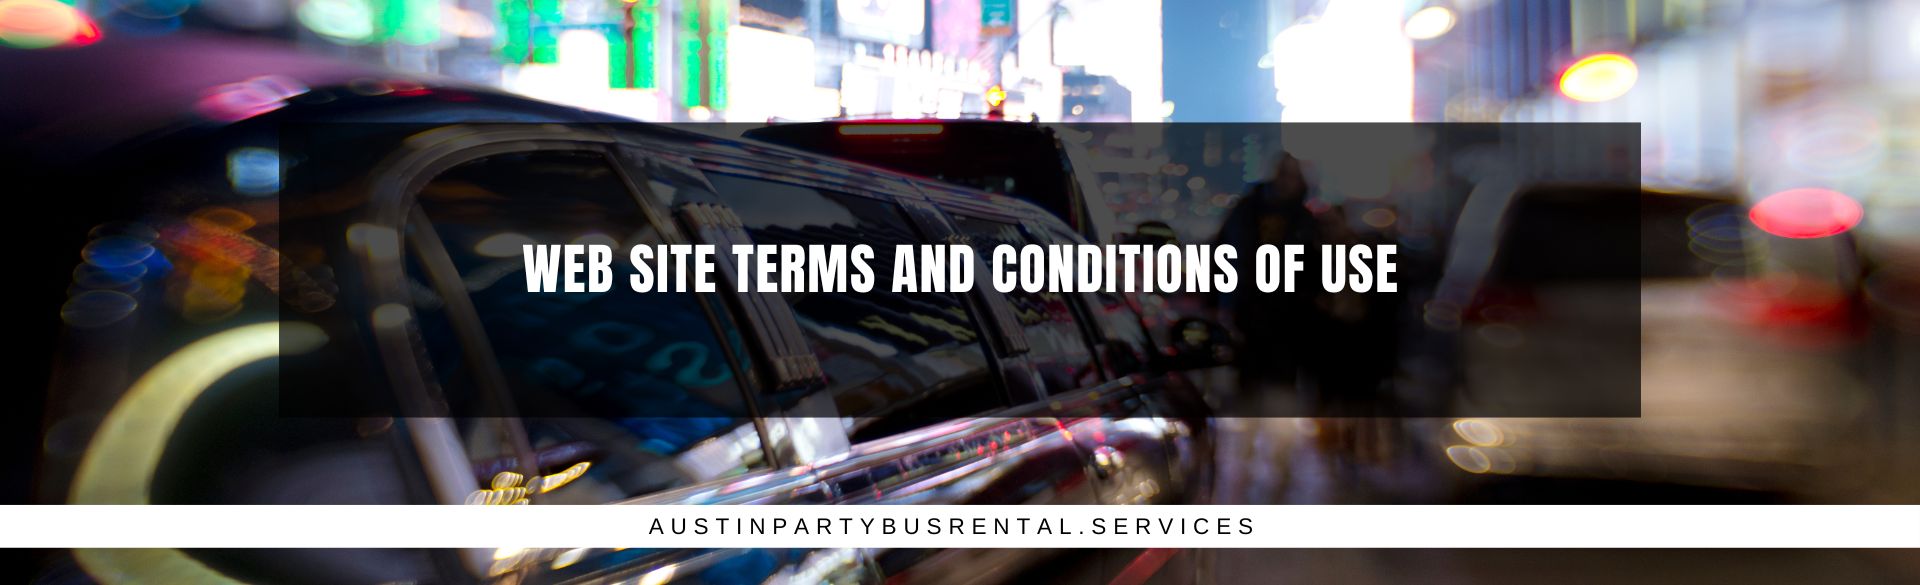 WEB SITE TERMS AND CONDITIONS OF USE